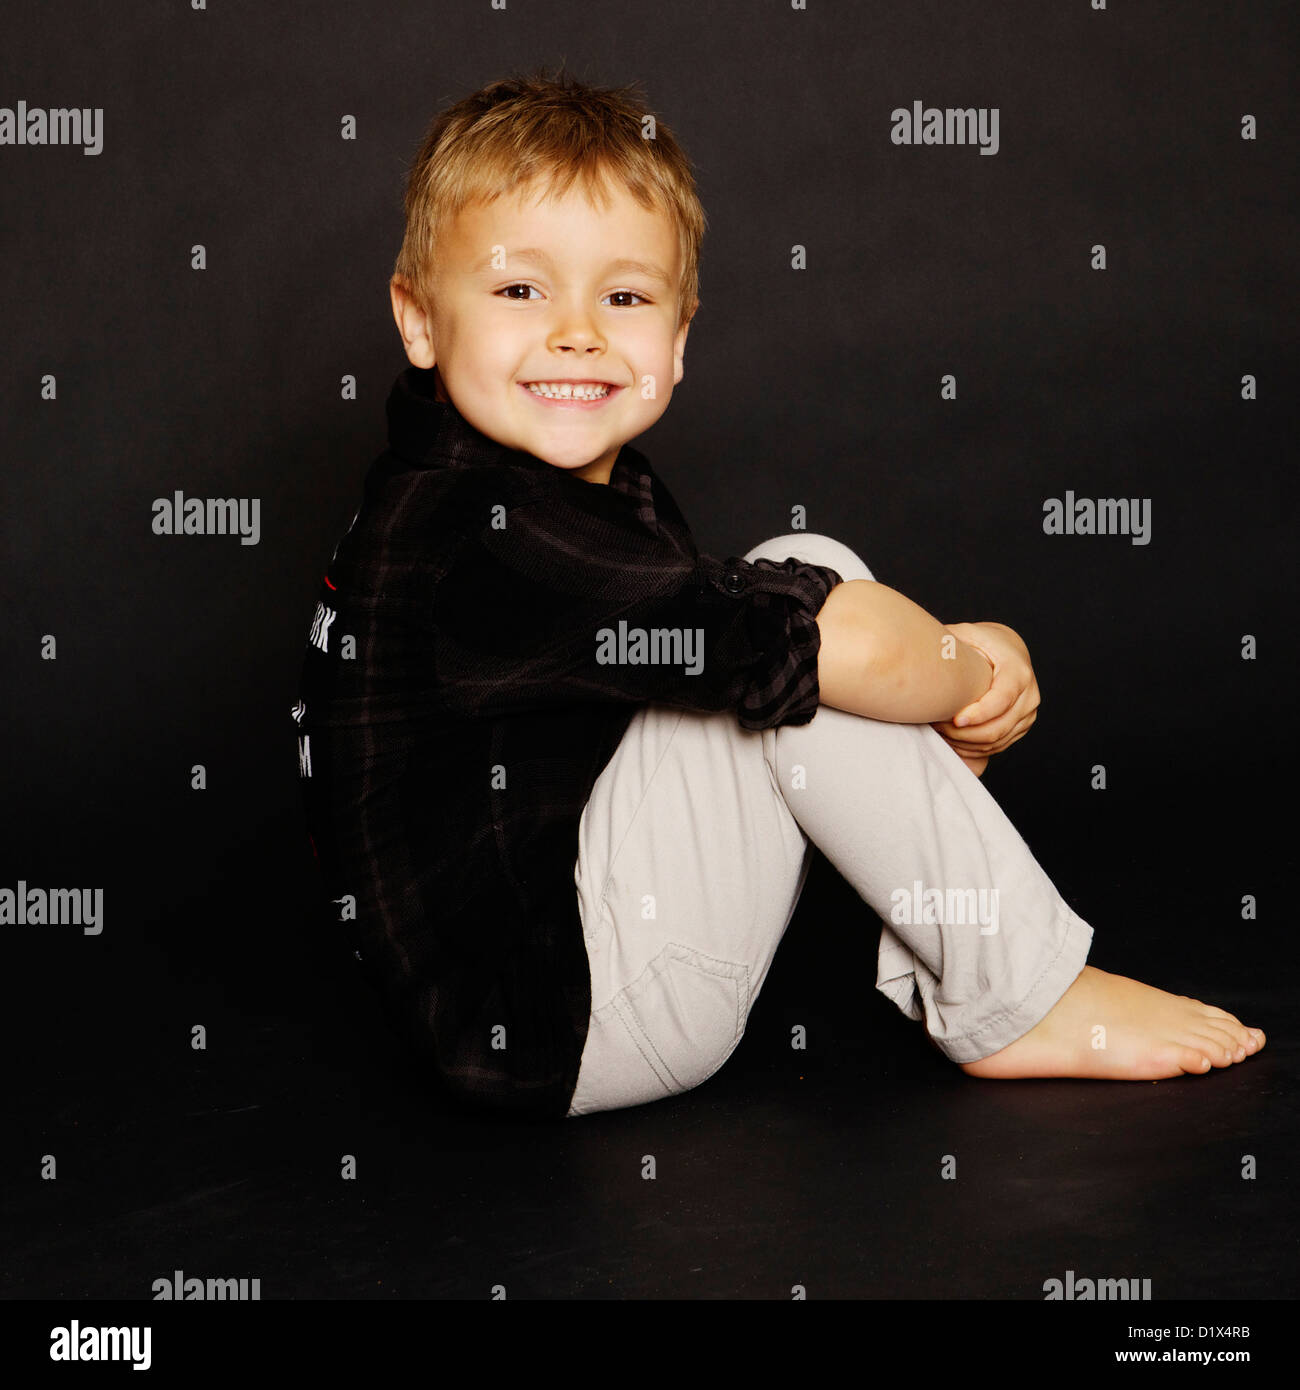 Young boy sitting on a black background in black shirt and beige/grey trousers posing for the camera and a portrait session Stock Photo